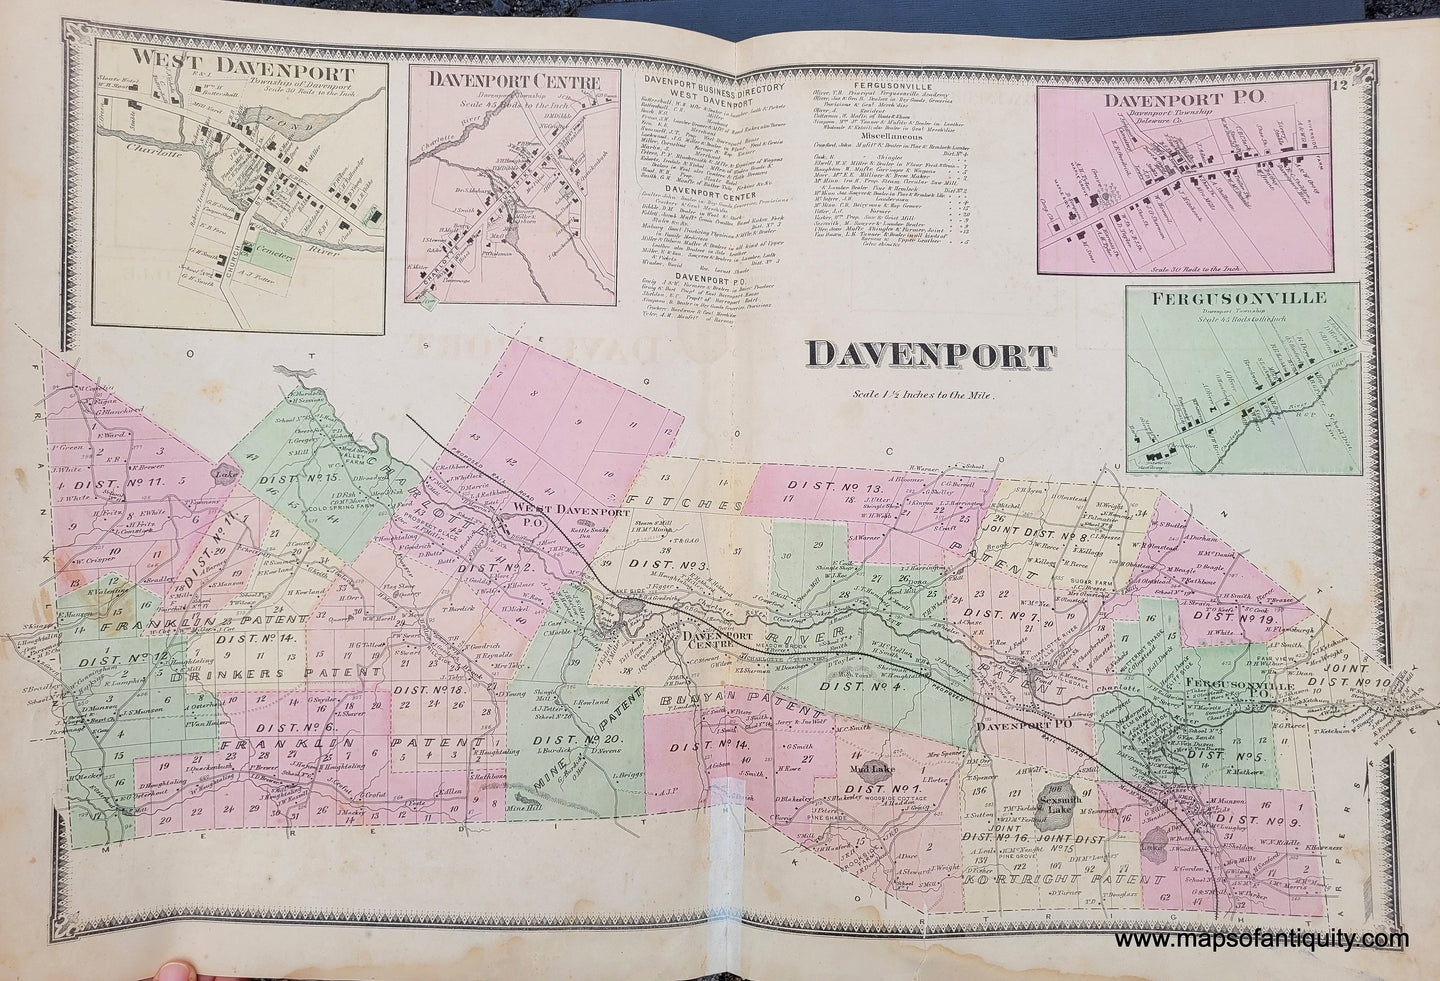 Genuine-Antique-Map-Davenport-Delaware-Co-NY-1869-Beers-Ellis-Soule-Maps-Of-Antiquity